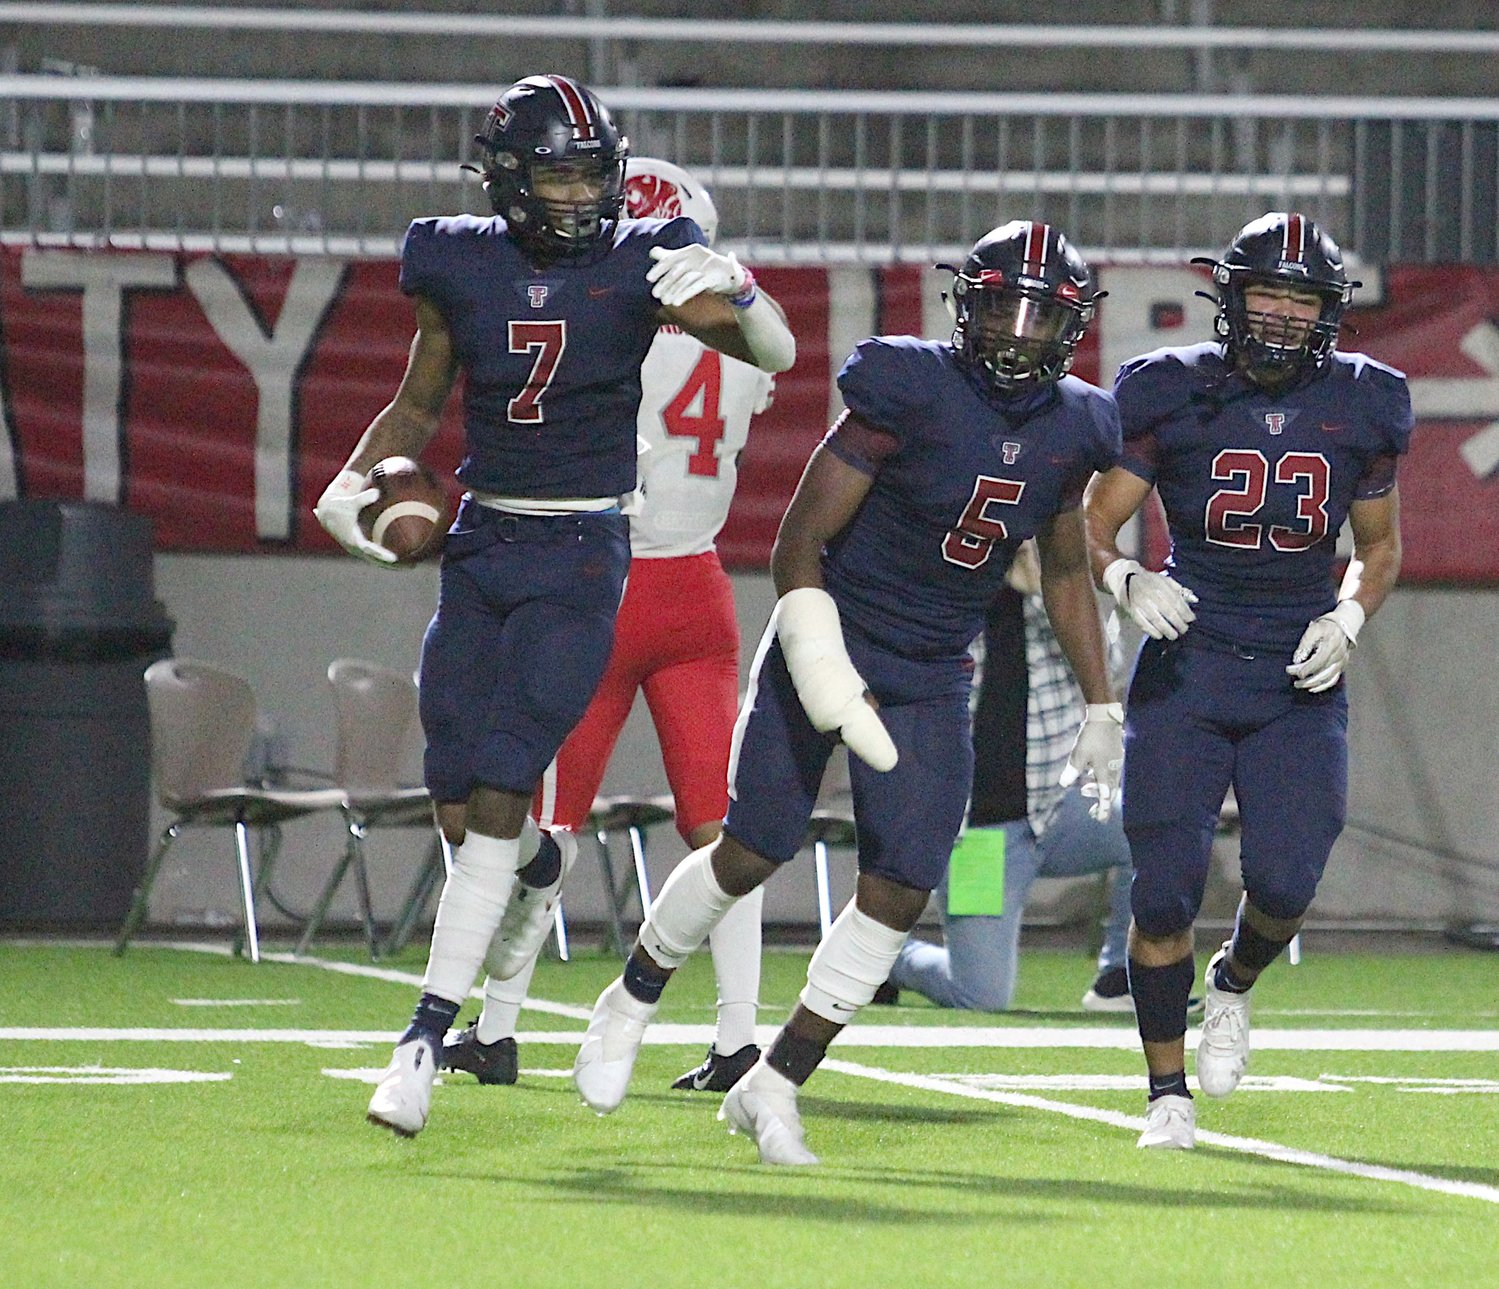 Tompkins senior defensive back Dru Polidore celebrates after his second-half interception during the Falcons' 24-19 win over Katy on Thursday evening at Legacy Stadium.